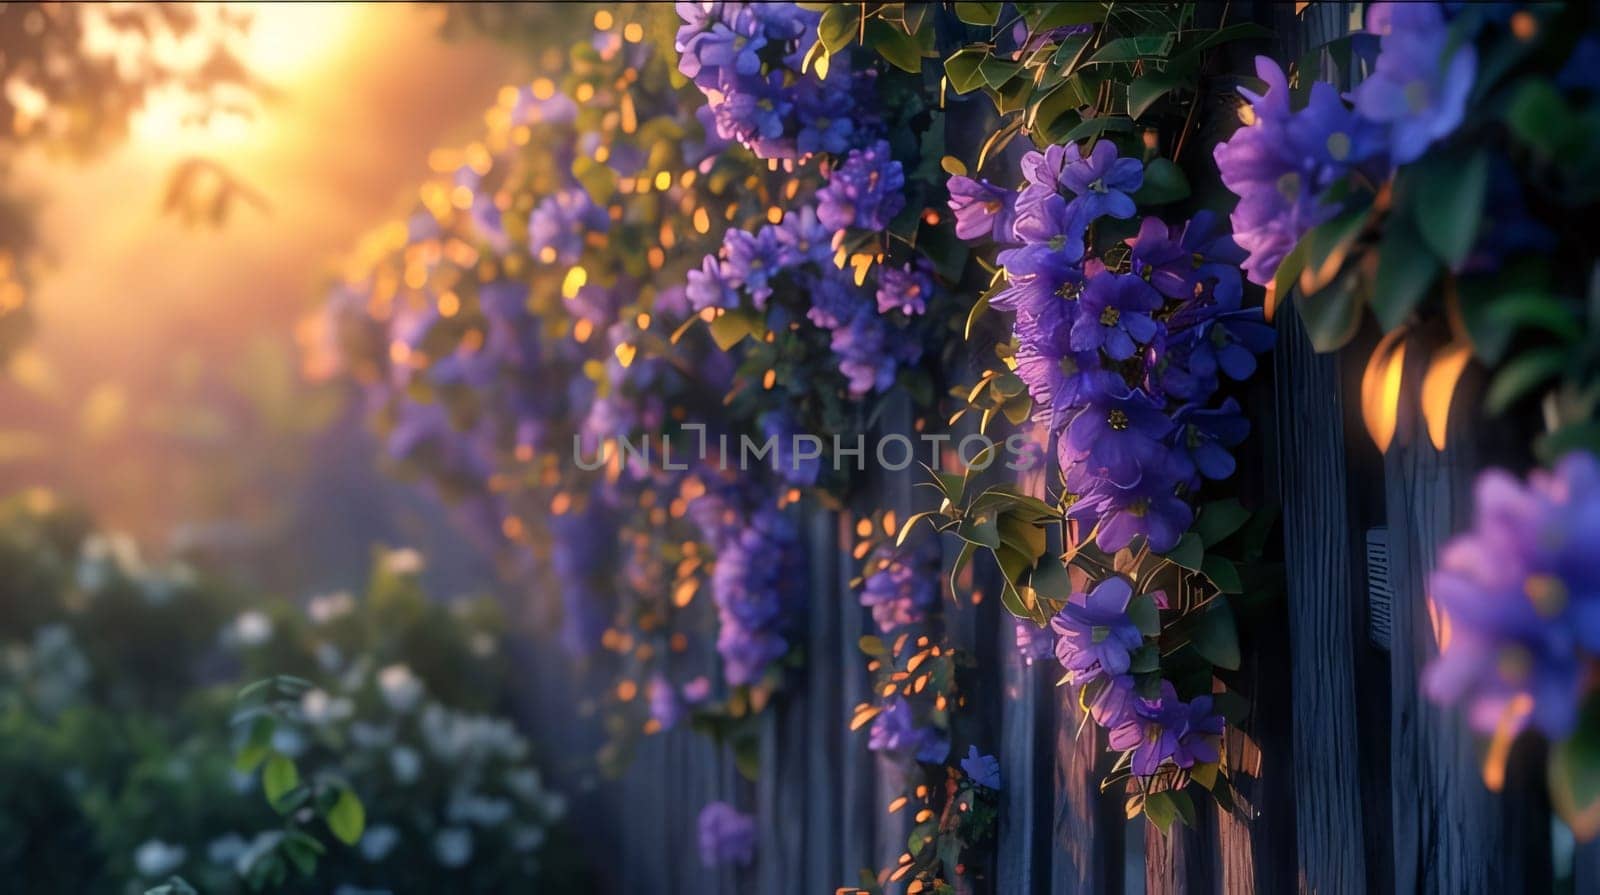 Blue flowers climbing on a wooden fence. rays of light, sunset in the background. Flowering flowers, a symbol of spring, new life. A joyful time of nature awakening to life.